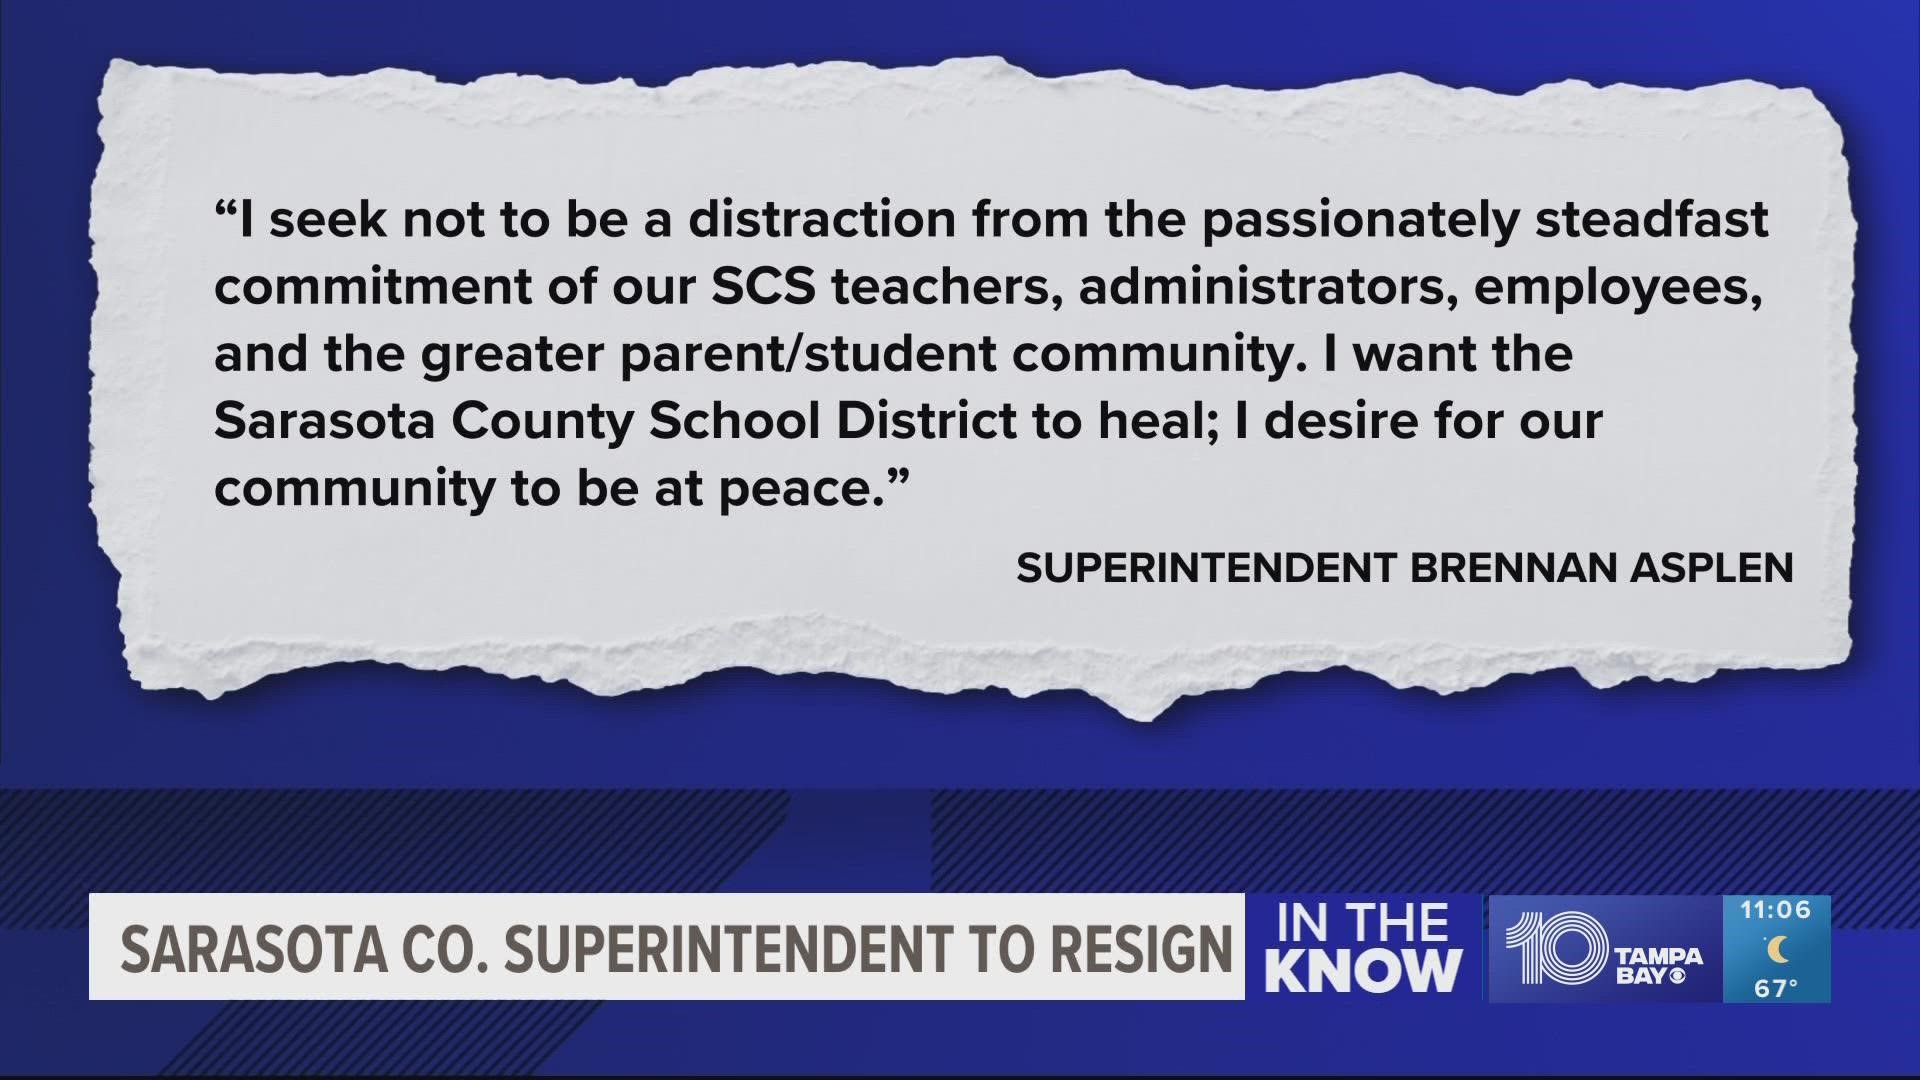 This announcement comes after he was negotiating with the Sarasota School Board to resign from his position.